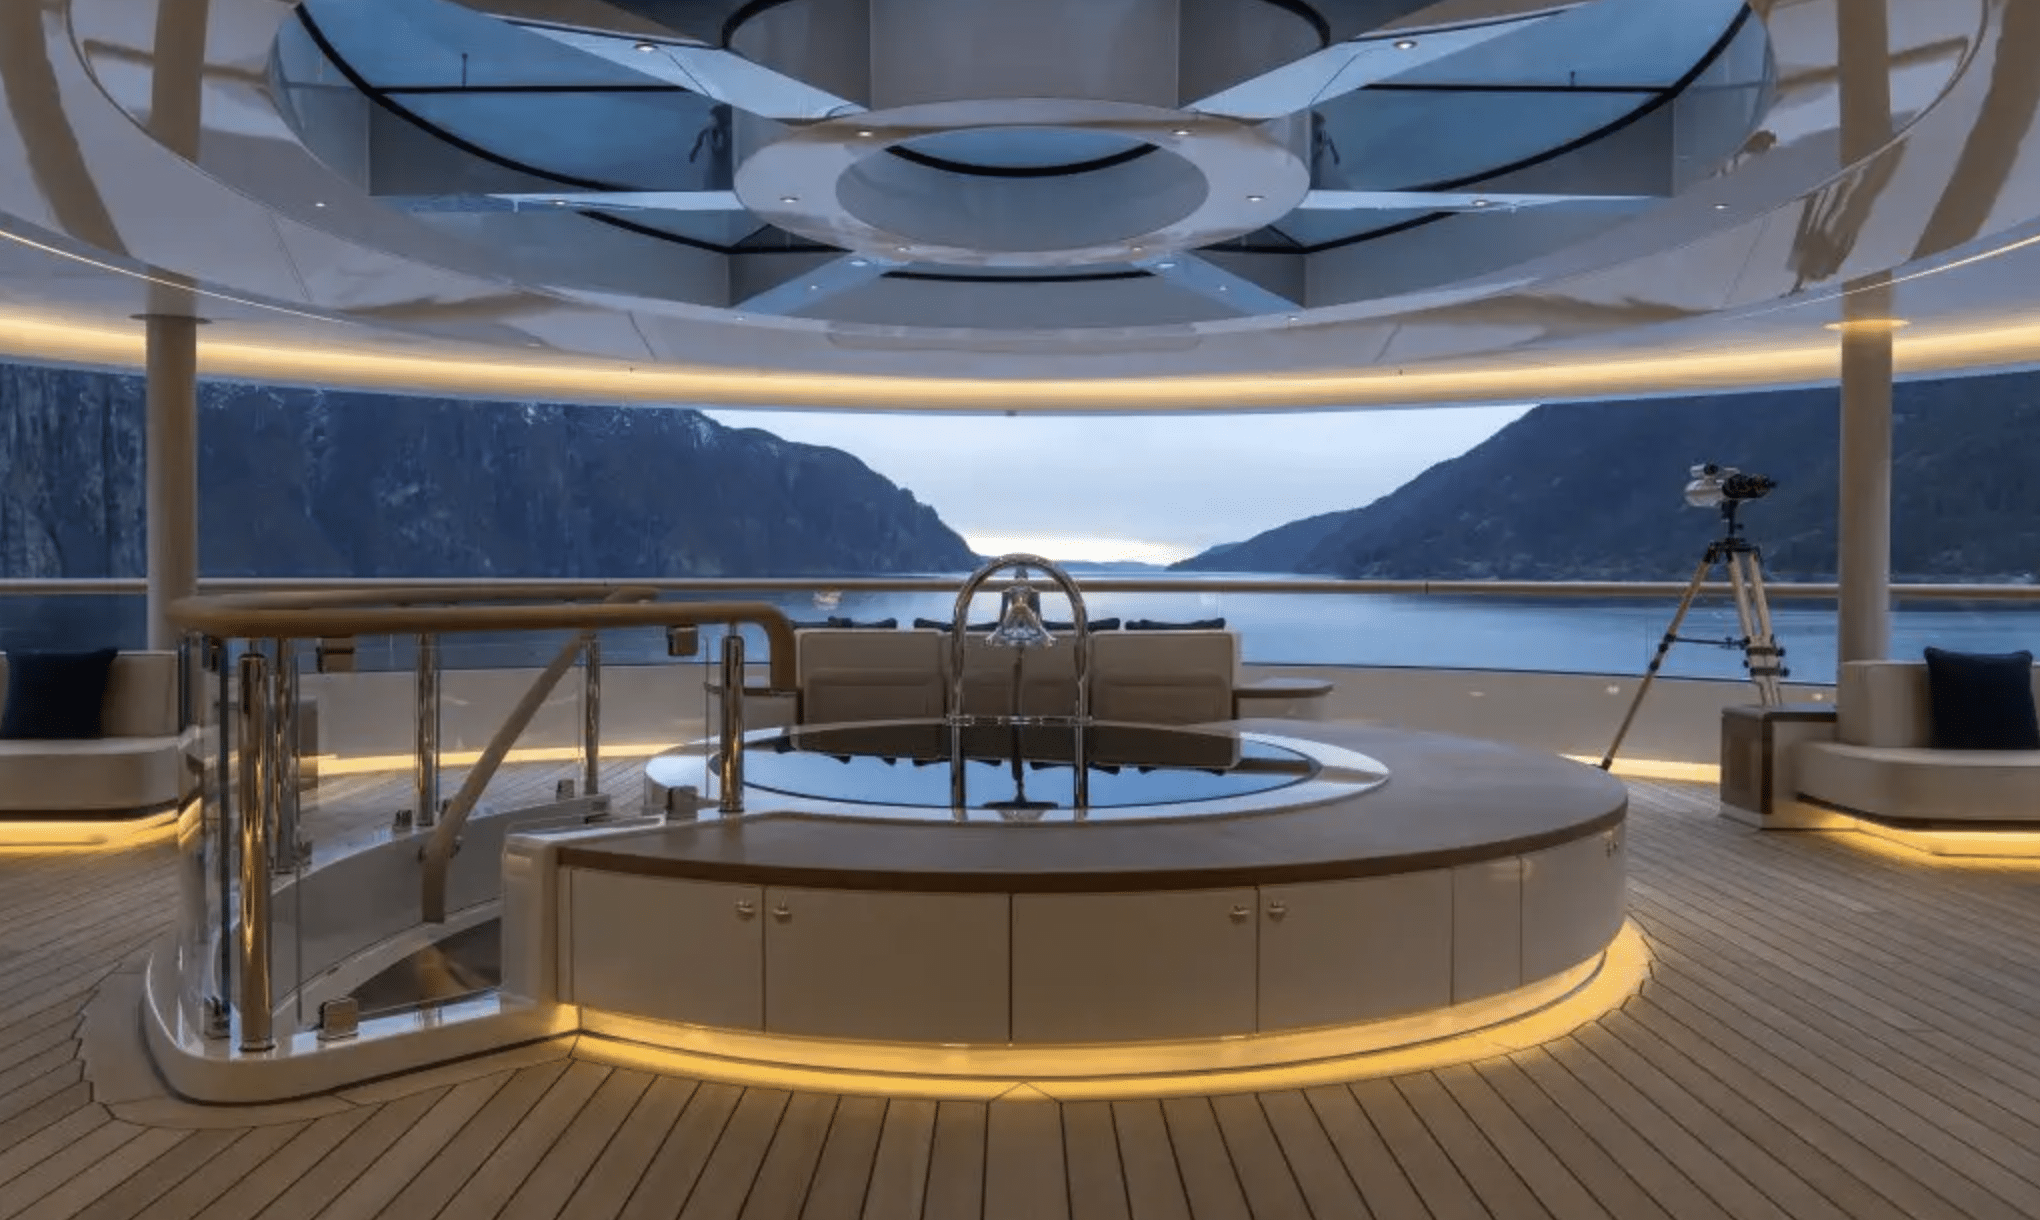 Beyoncé the and vacationing is are Jay-Z This superyacht on